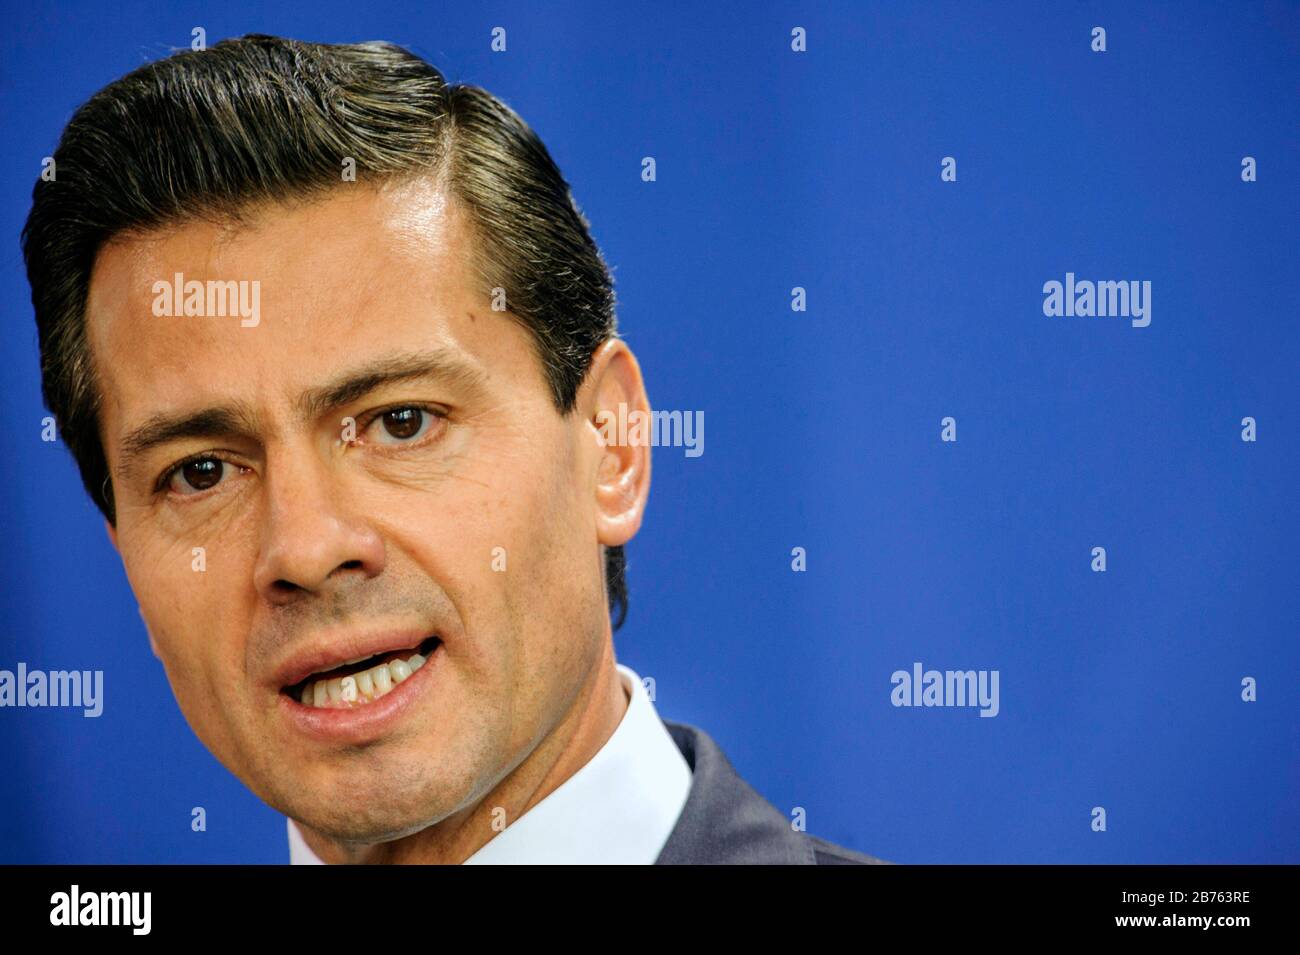 Germany, Berlin, 12.04.2016. Visit of the President of the United States of Mexico to the Federal Chancellery on 12.04.2016 in Berlin. Enrique Pena Nieto, Enrique Peña Nieto, President of the United States of Mexico [automated translation] Stock Photo